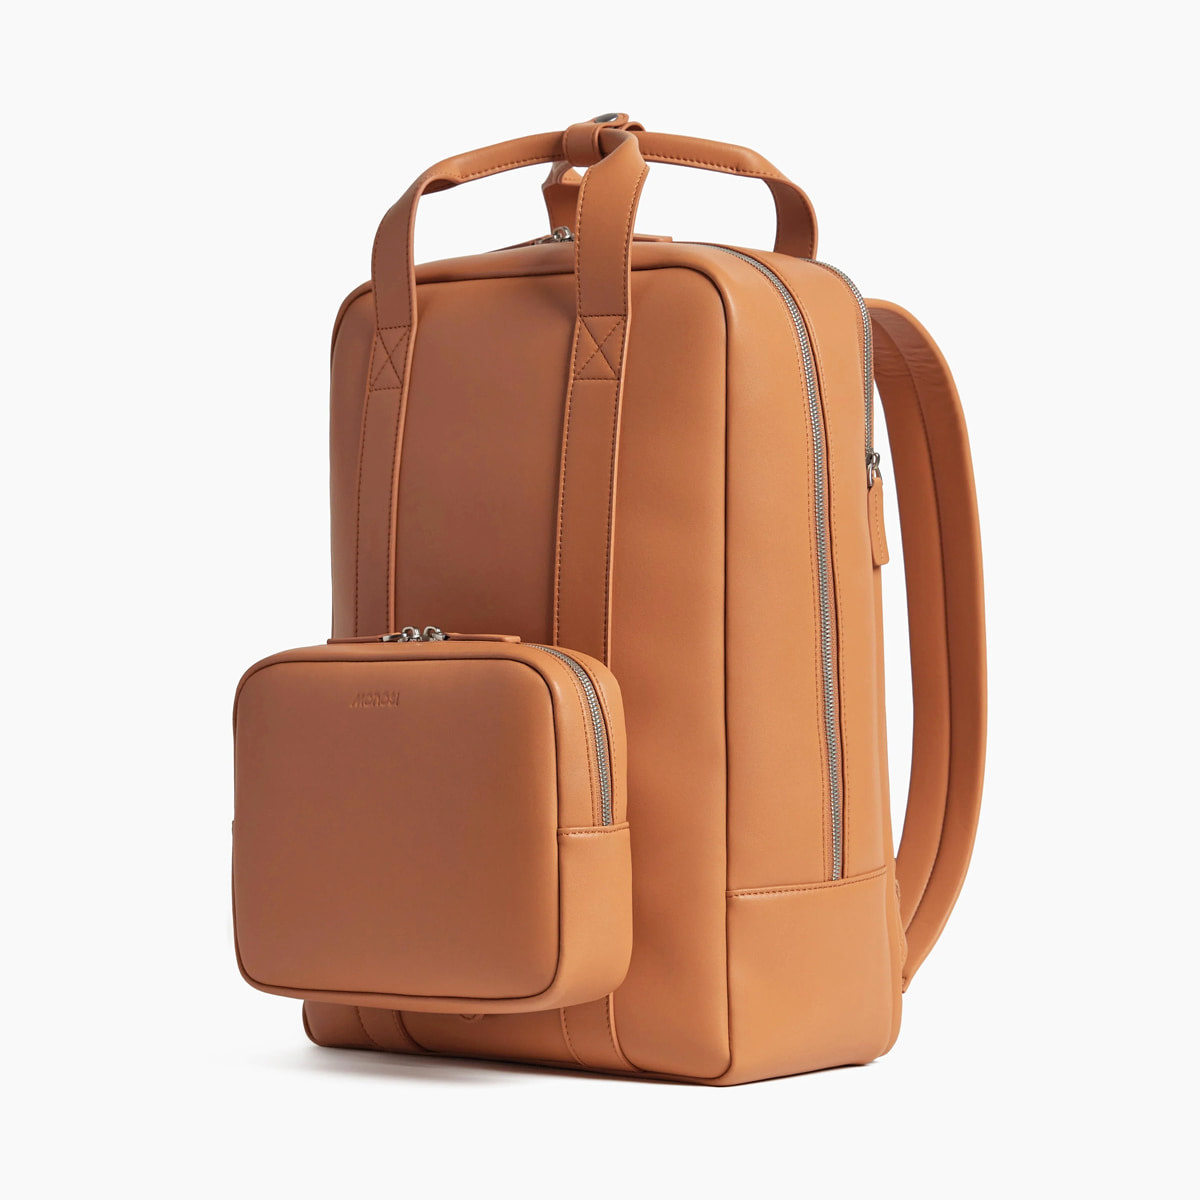 Vegan leather carry-on backpack